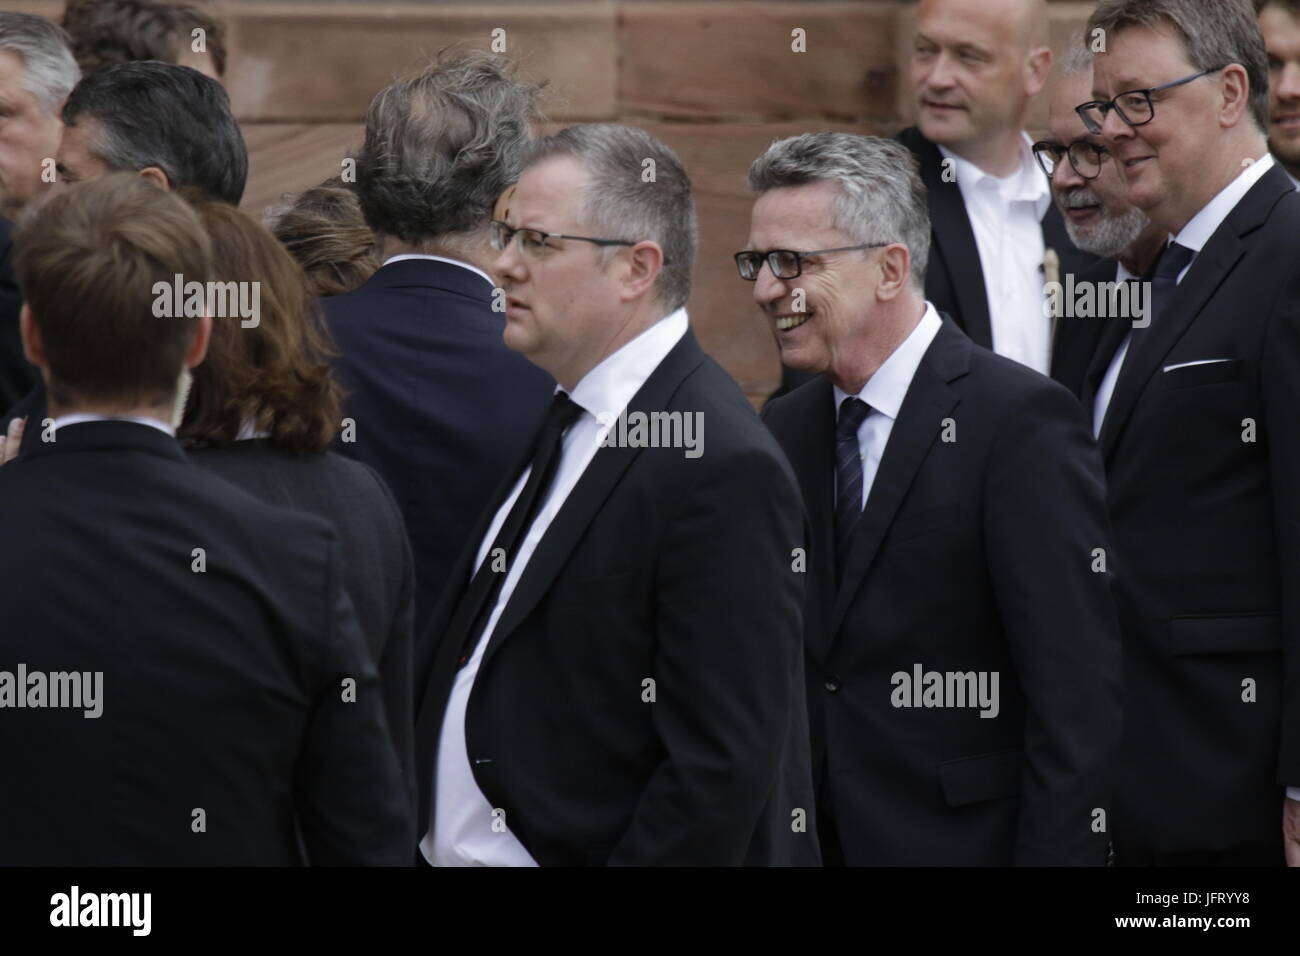 Speyer, Germany. 01st July, 2017. Thomas de Maiziere (right), the German Minister of the Interior, arrives at the Speyer Cathedral. A funeral mass for the former German Chancellor Helmut Kohl was held in the Cathedral of Speyer. it was attended by over 1000 invited guests and several thousand people followed the mass outside the Cathedral. Credit: Michael Debets/Pacific Press/Alamy Live News Stock Photo